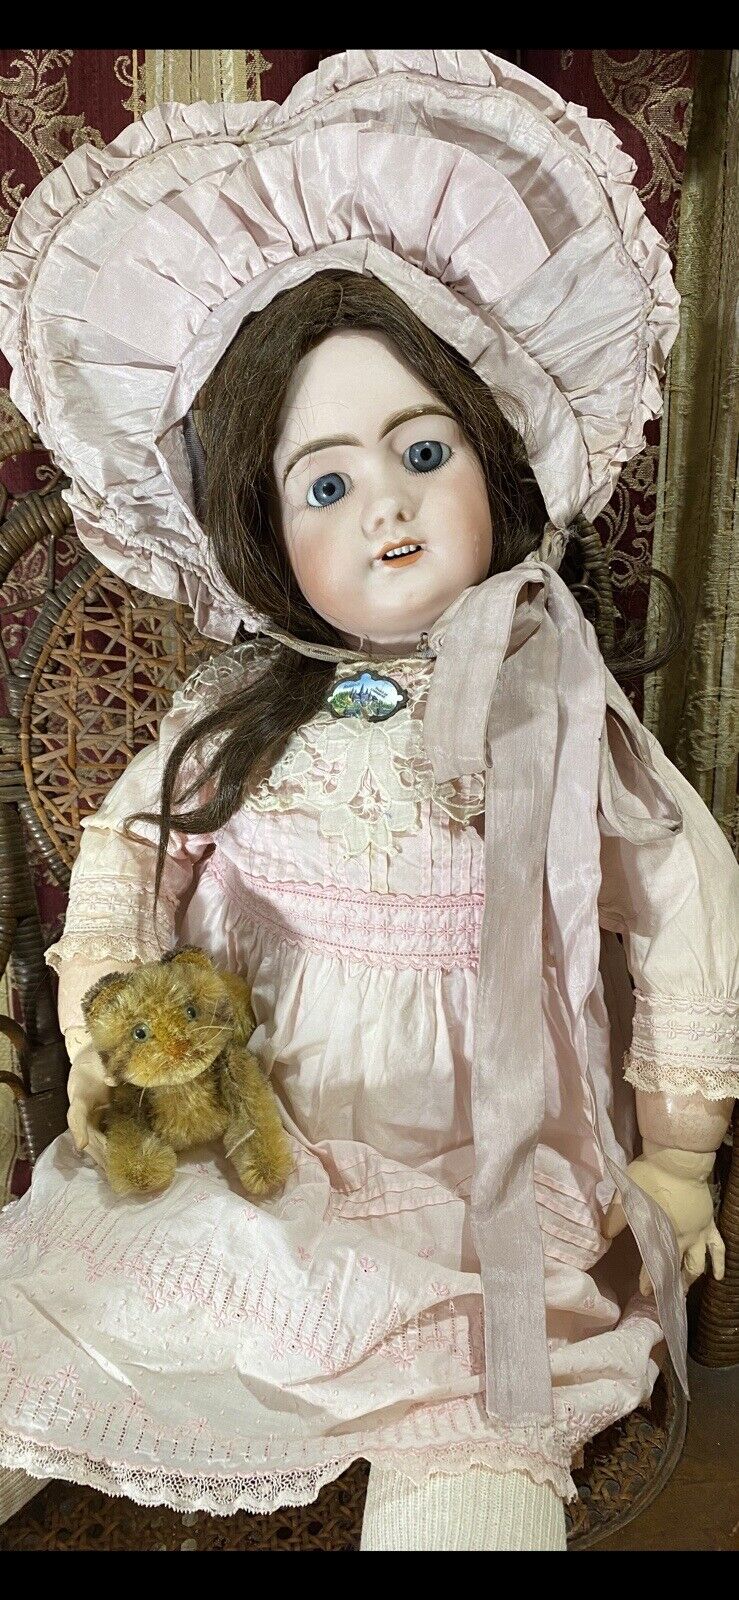 Tete JUMEAU 13 French Doll Antique 27” SFBJ Chunky Body  fab antique outfit